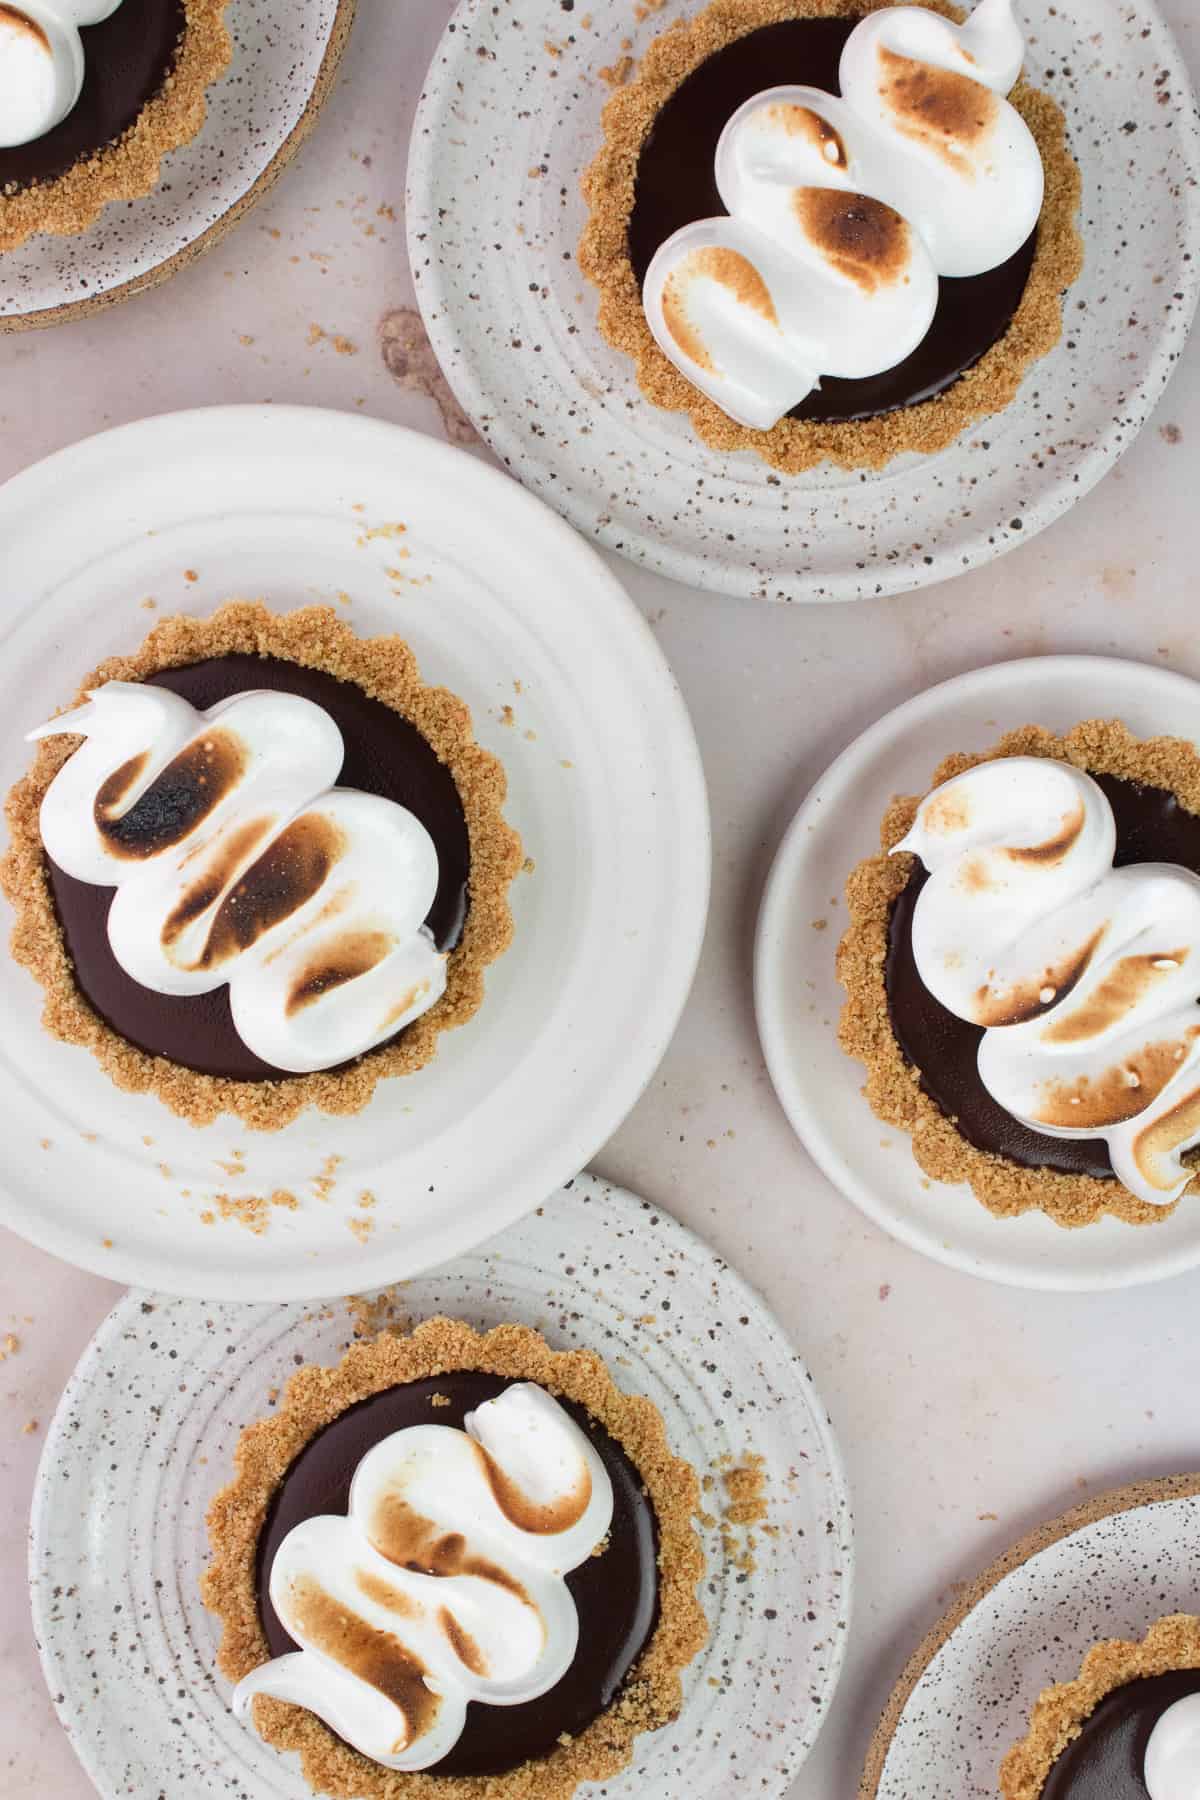 6 Mini S'Mores Tart are on individual plates